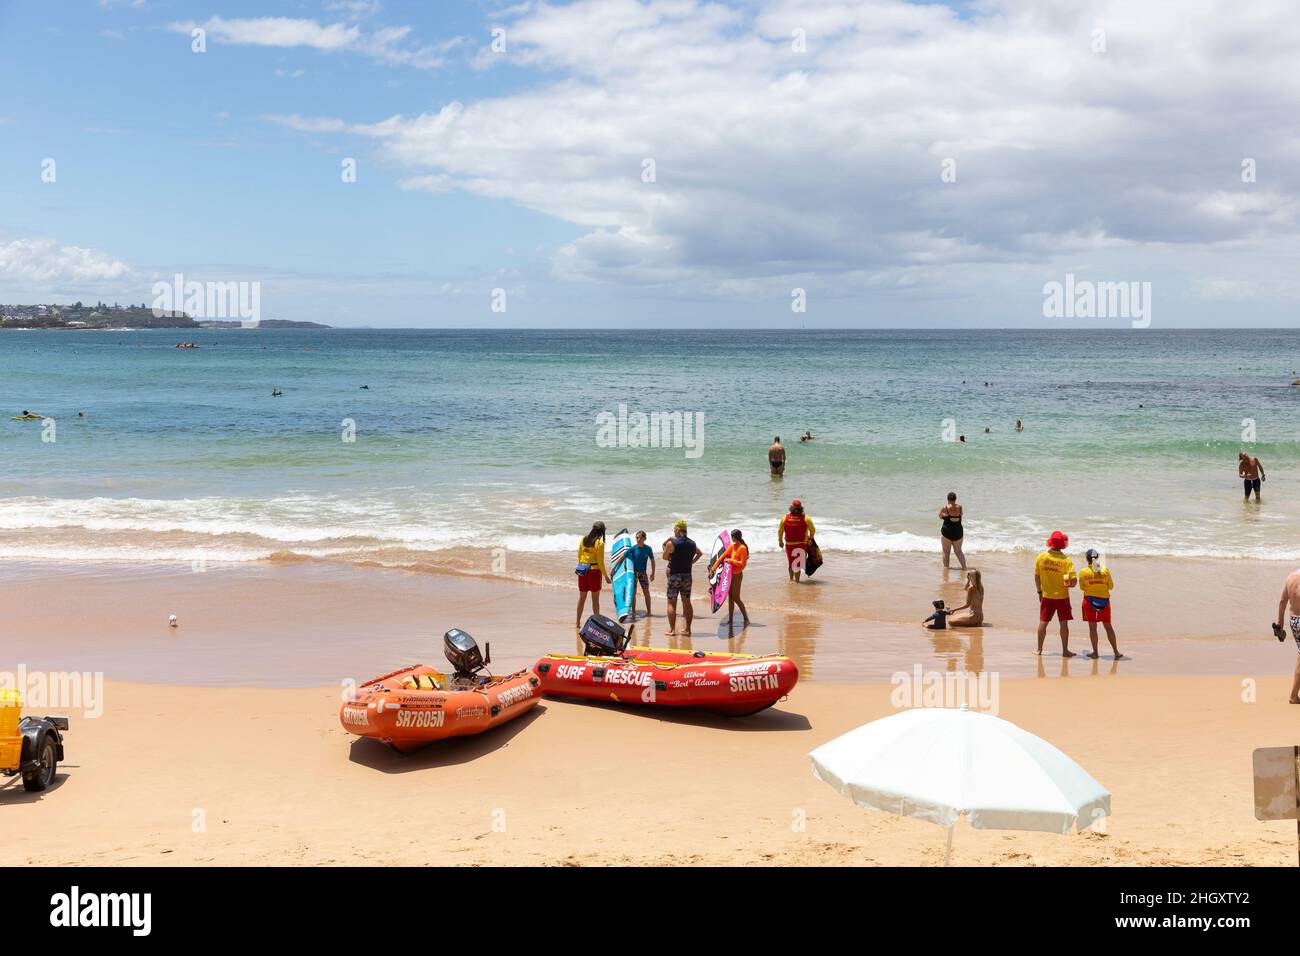 Surf rescue patrol with zodiac dinghy RIB boats on Manly Beach Sydney,New South Wales,Australia on a summers day Stock Photo